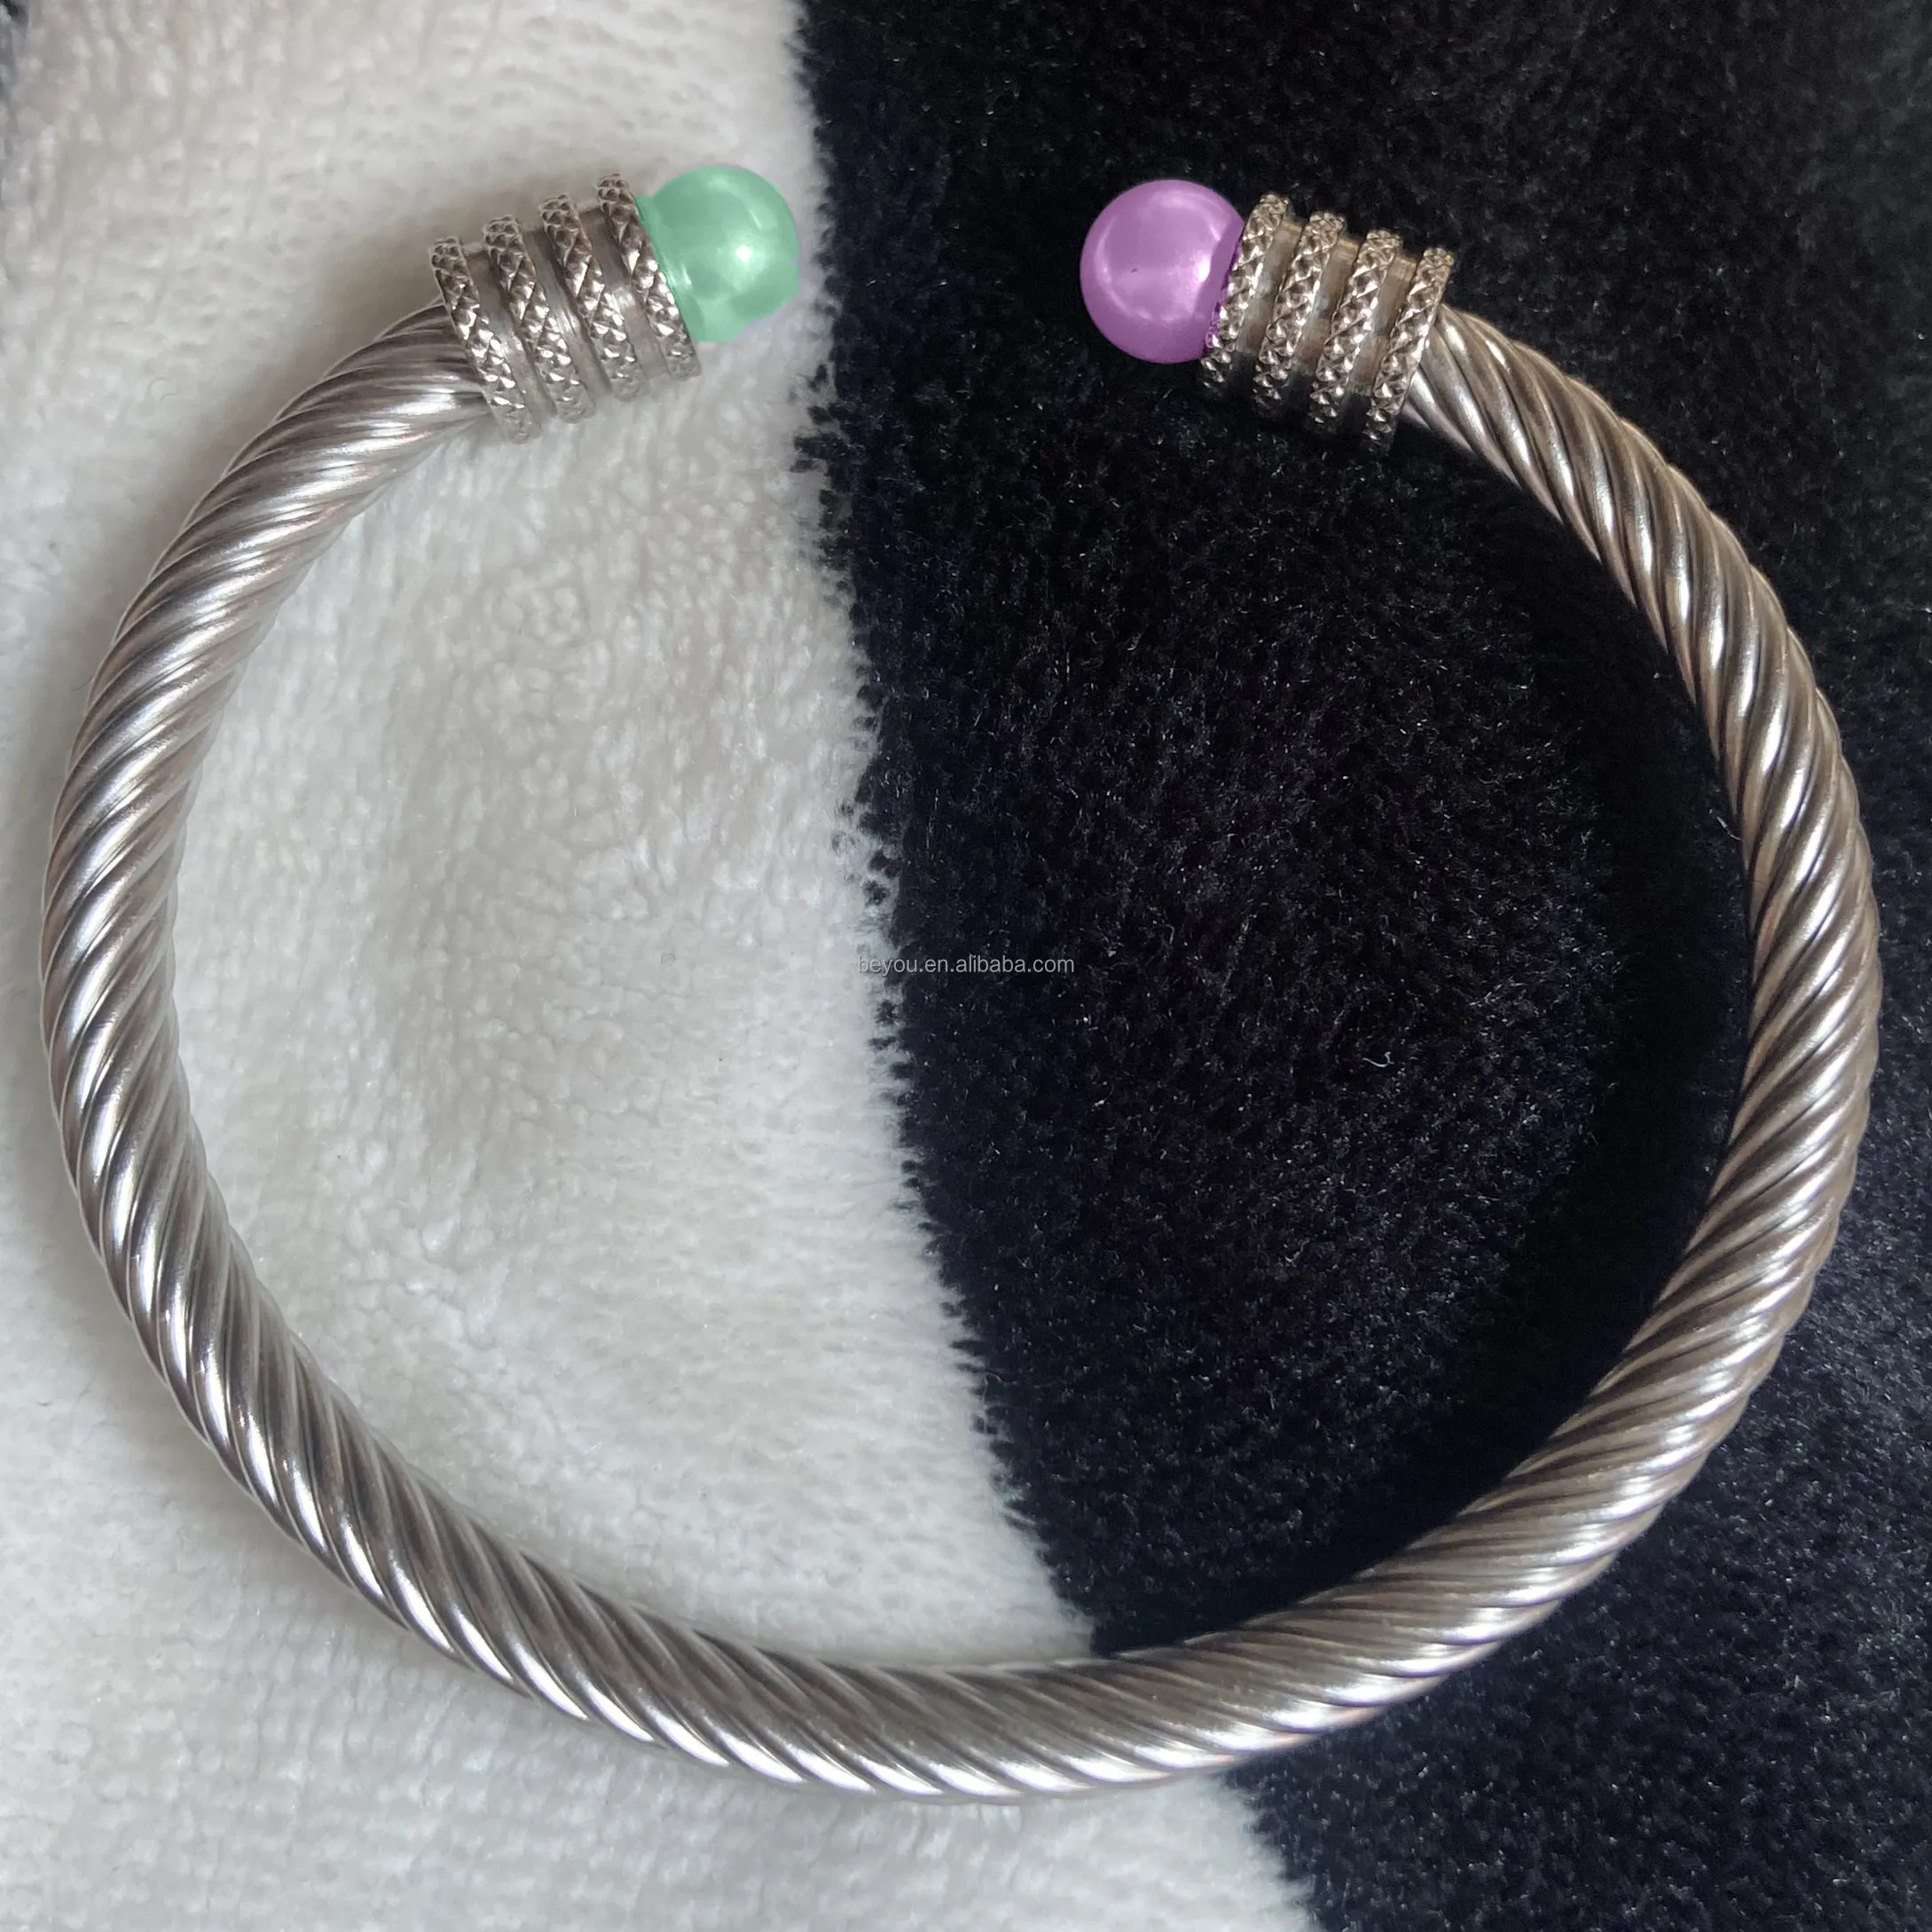 Customize Color Designer Pink Green Pearl Cuff Open Full Bangle Stainless Steel Cable Twist Bracelet Women Wedding Jewelry